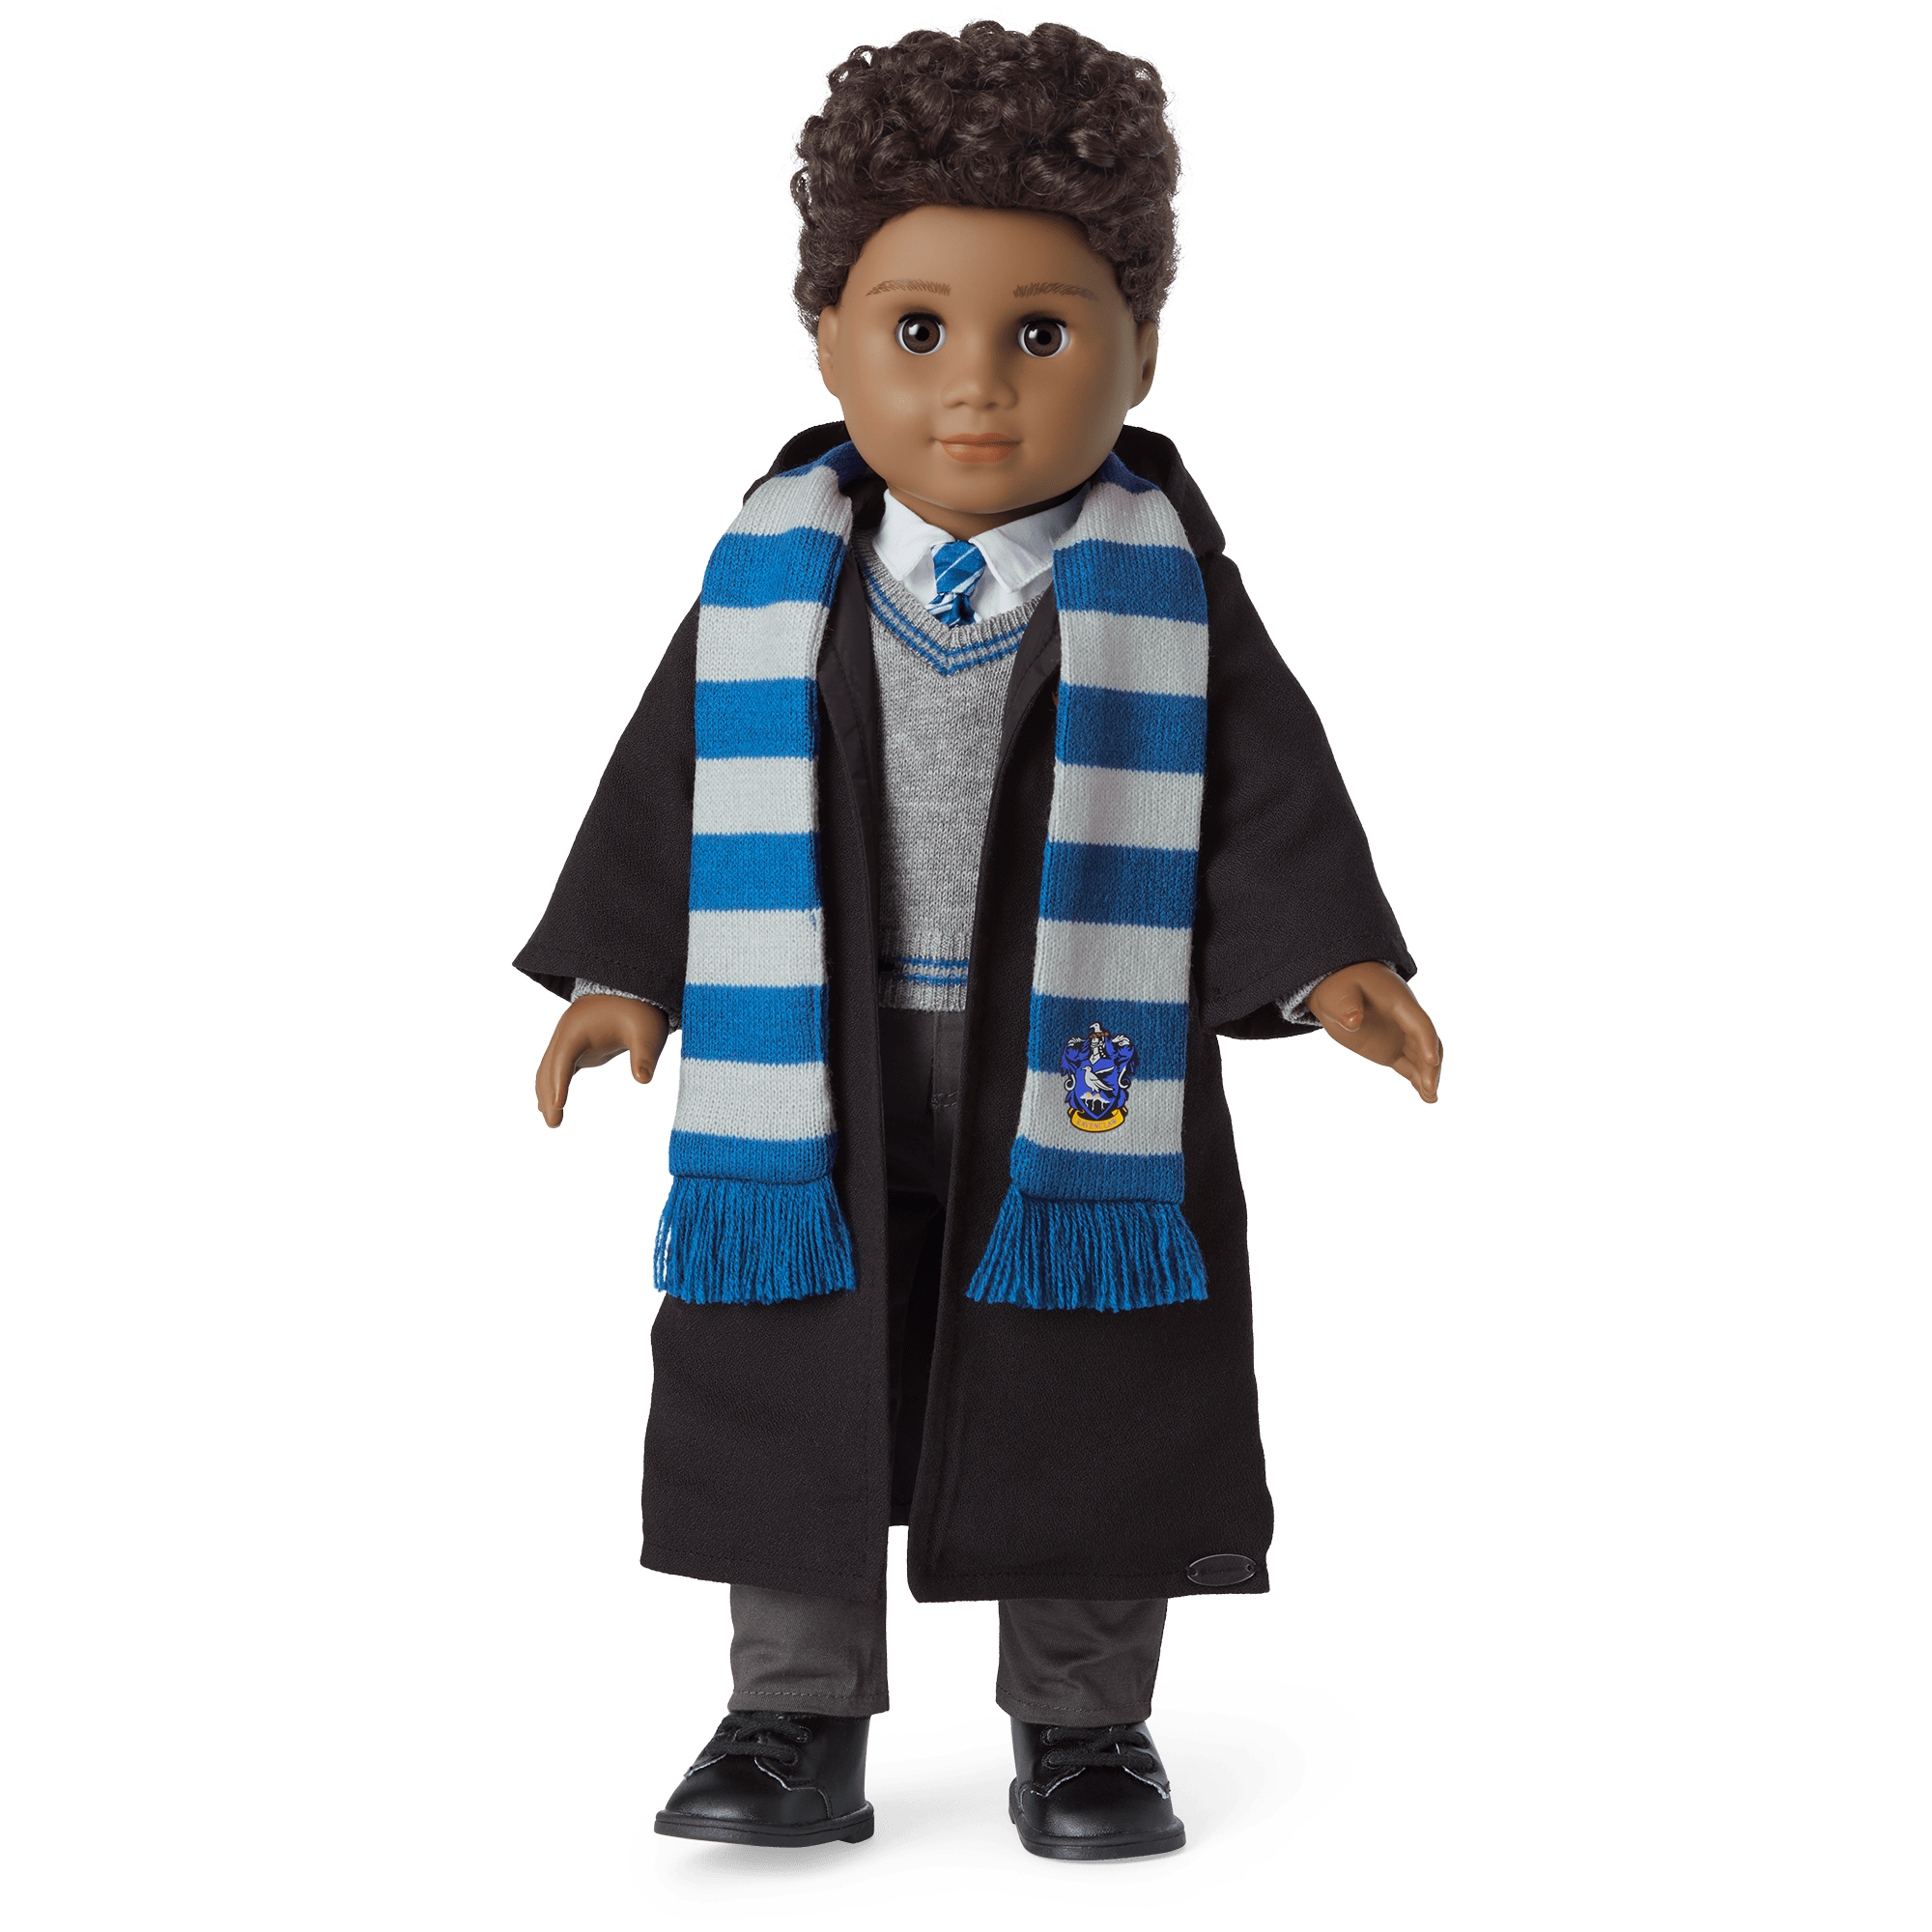 American Girl Harry Potter 18-inch Doll Hufflepuff Outfit with Sweater and  Scarf Featuring House Crest, For Ages 6+